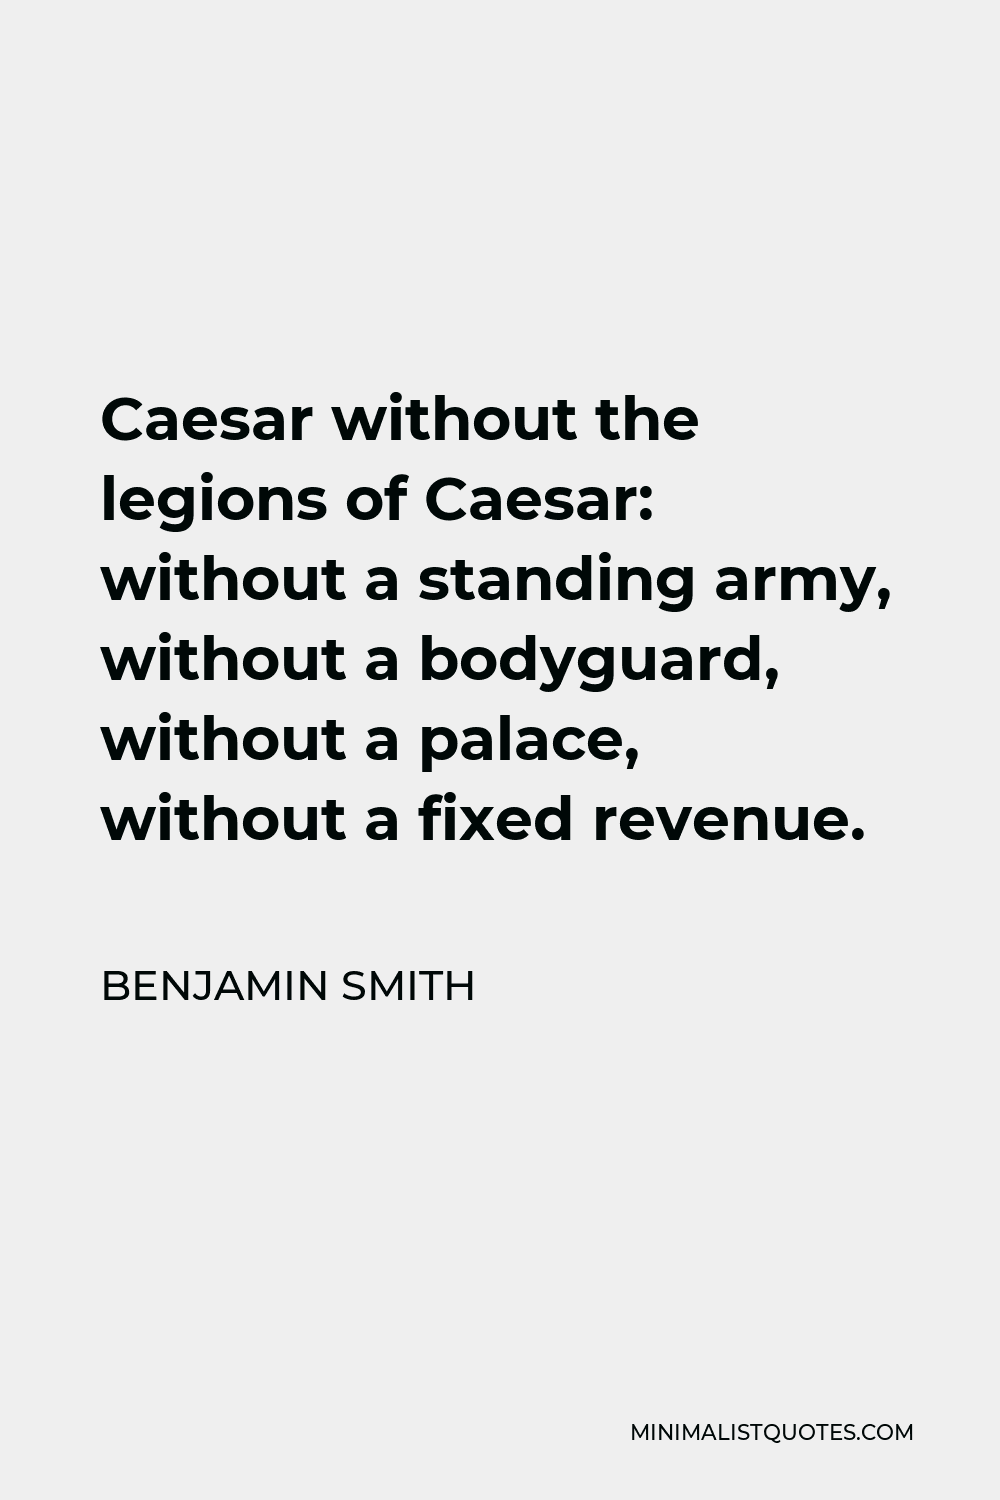 Benjamin Smith Quote - Caesar without the legions of Caesar: without a standing army, without a bodyguard, without a palace, without a fixed revenue.